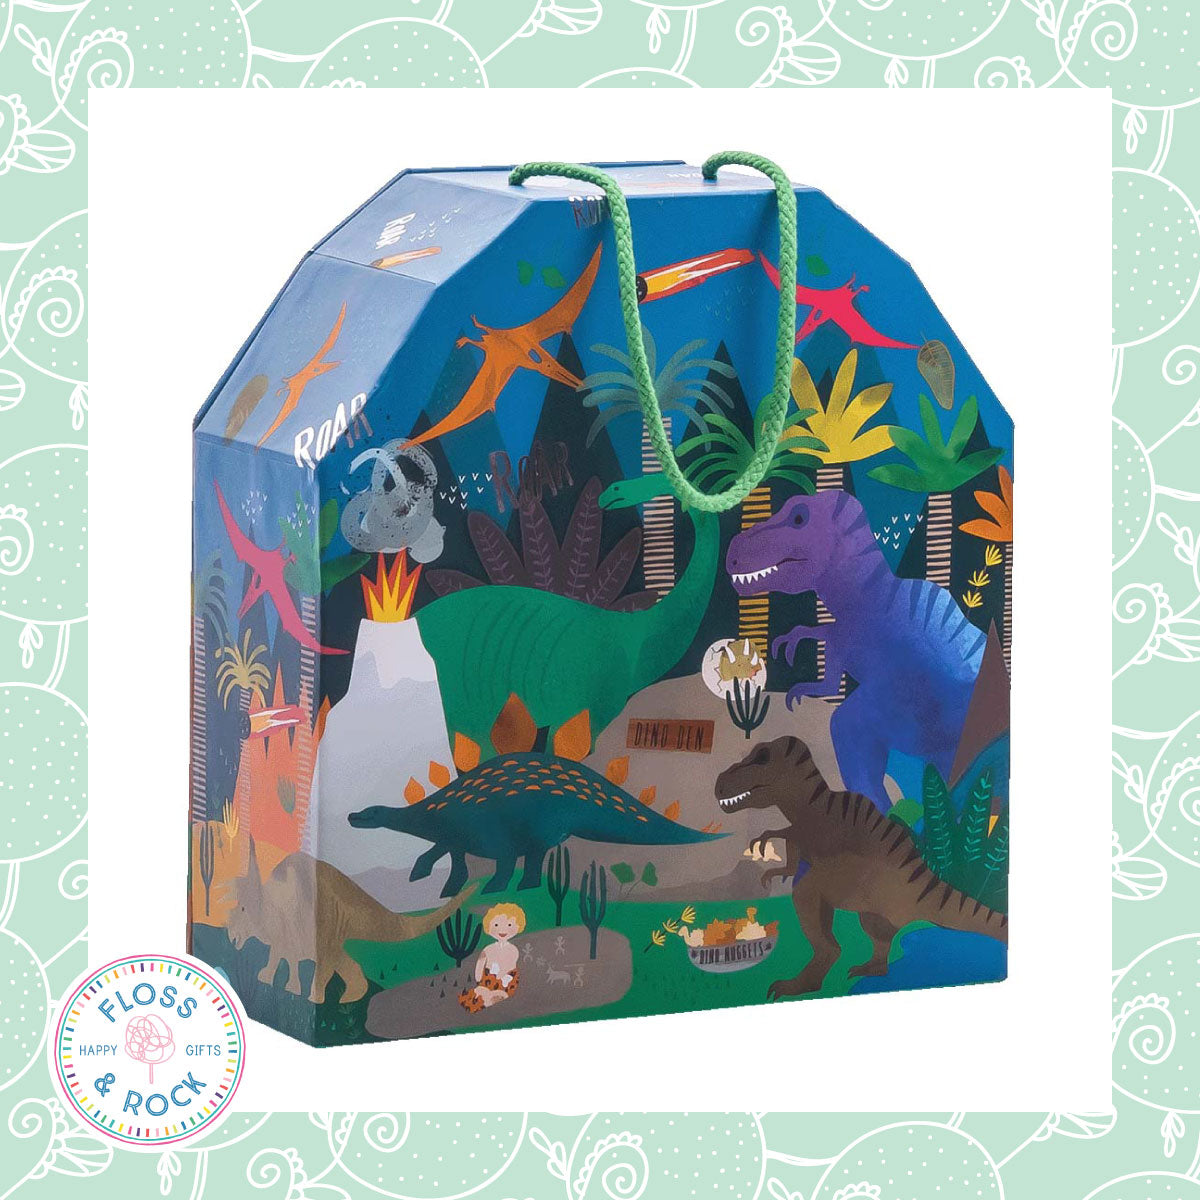 Floss & Rock Playbox With Wooden Pieces - Dinosaur